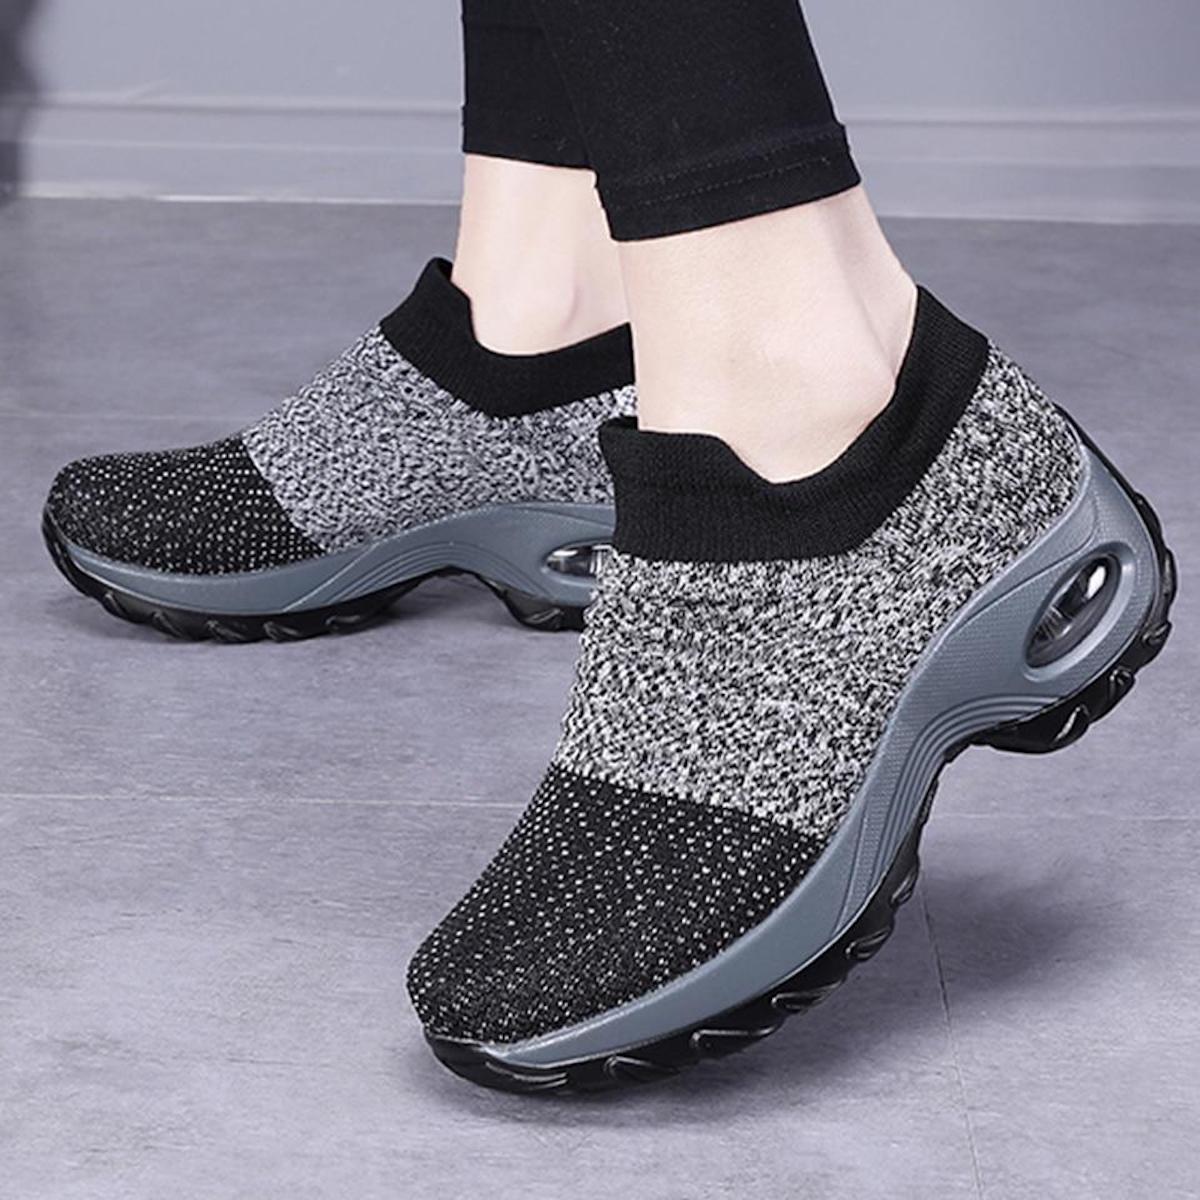 The Secret Cult Walking Shoe That Walkers Everywhere Are Obsessed With ...